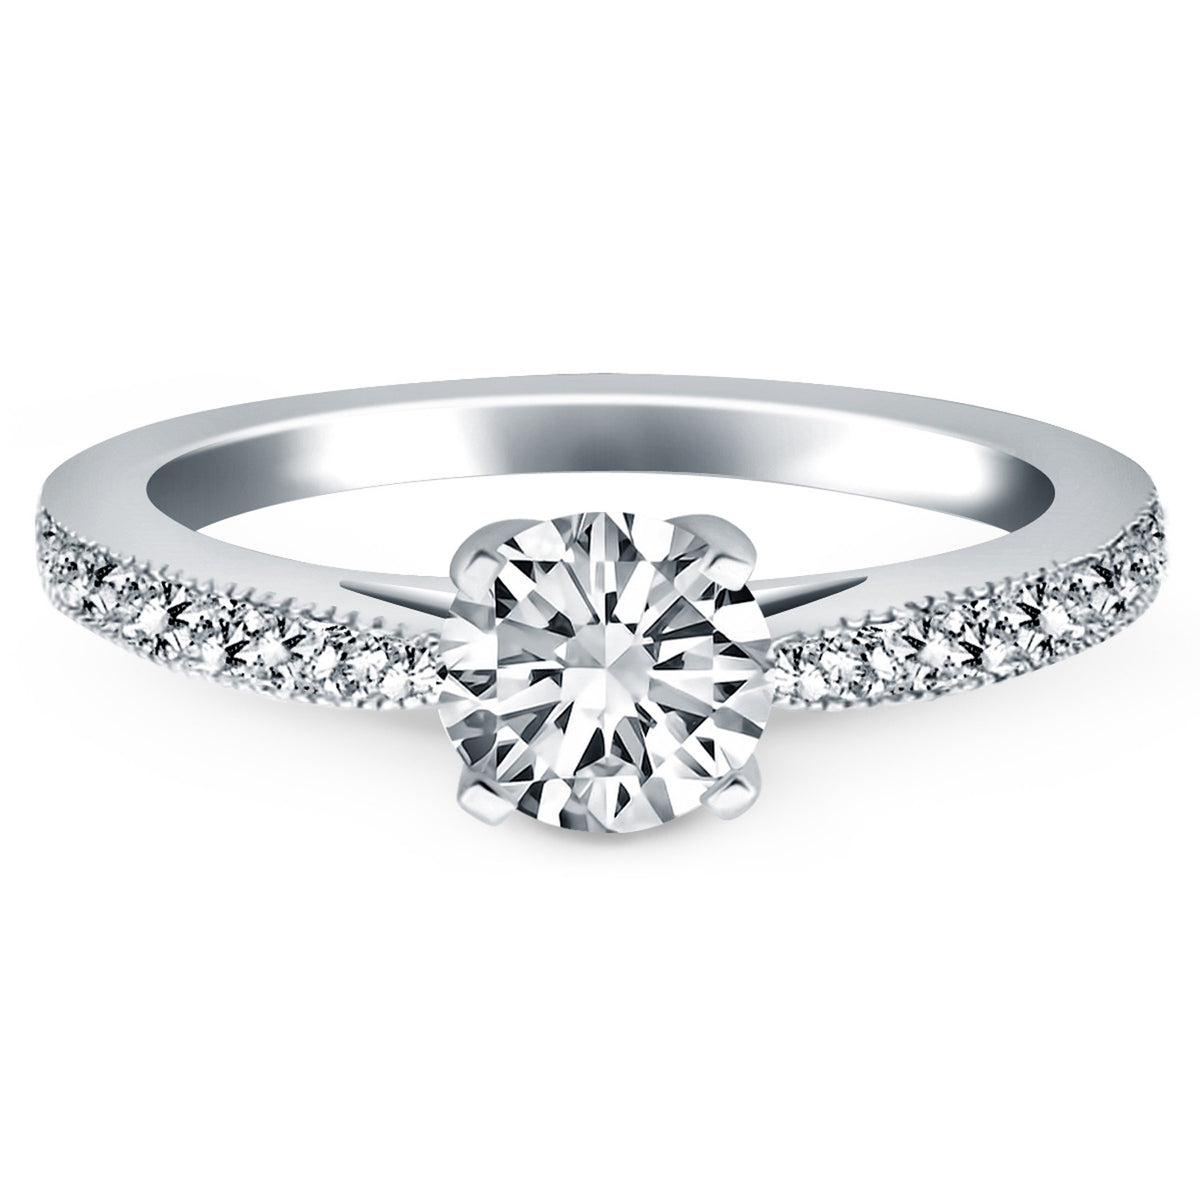 Diamond Pave Cathedral Engagement Ring - 14k White Gold